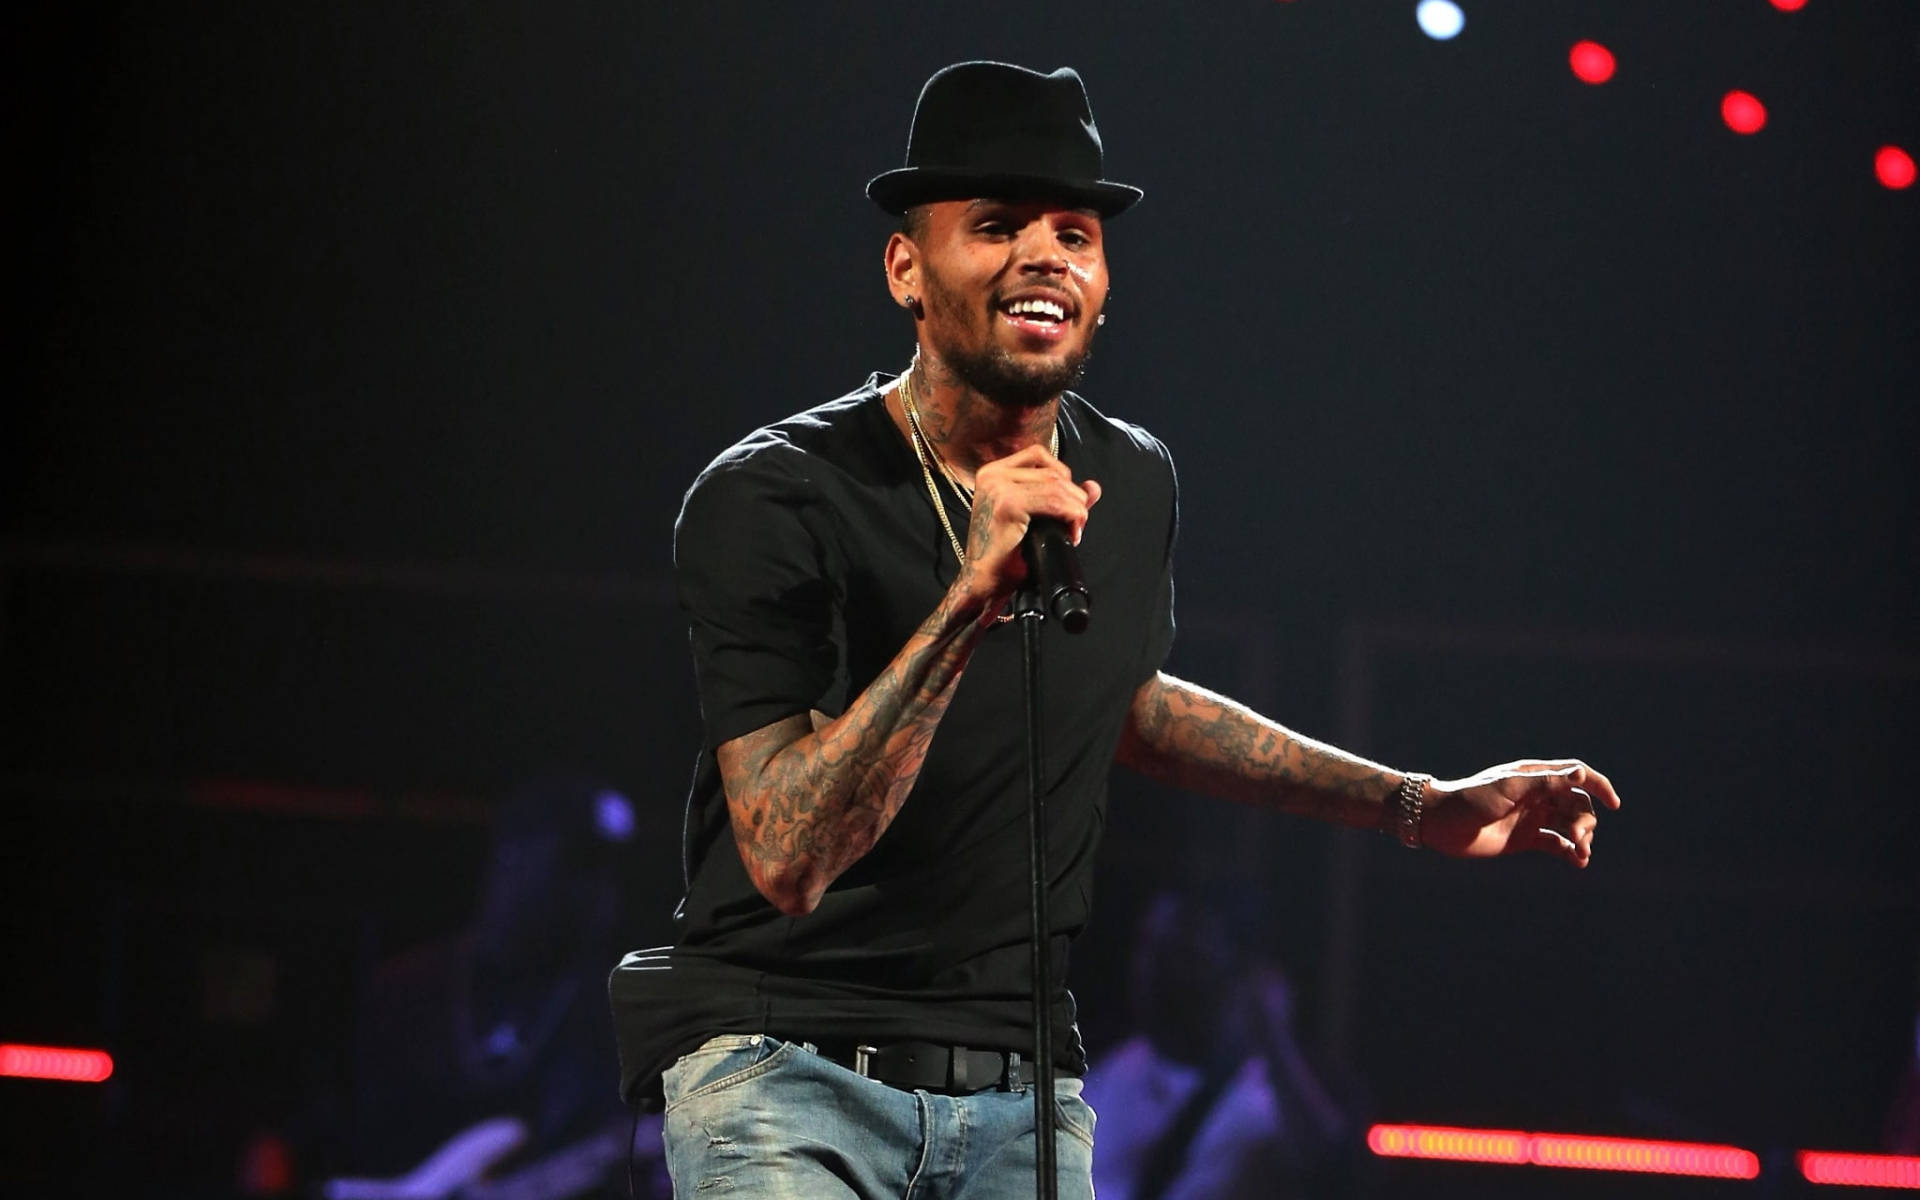 Chris Brown On Stage Background